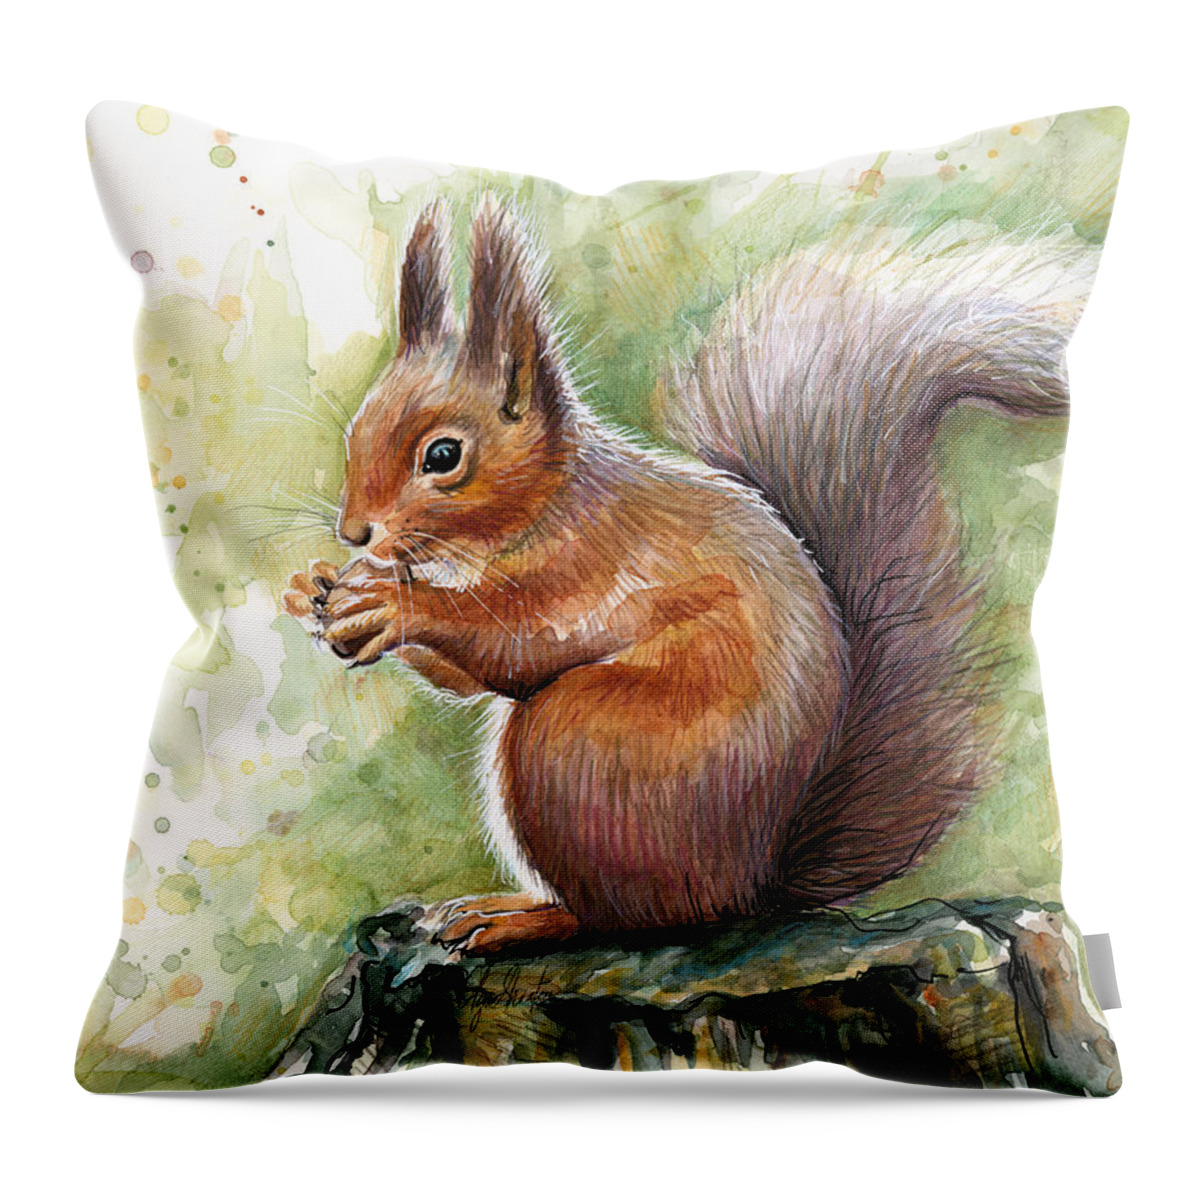 Squirrel Throw Pillow featuring the painting Squirrel Watercolor Art by Olga Shvartsur